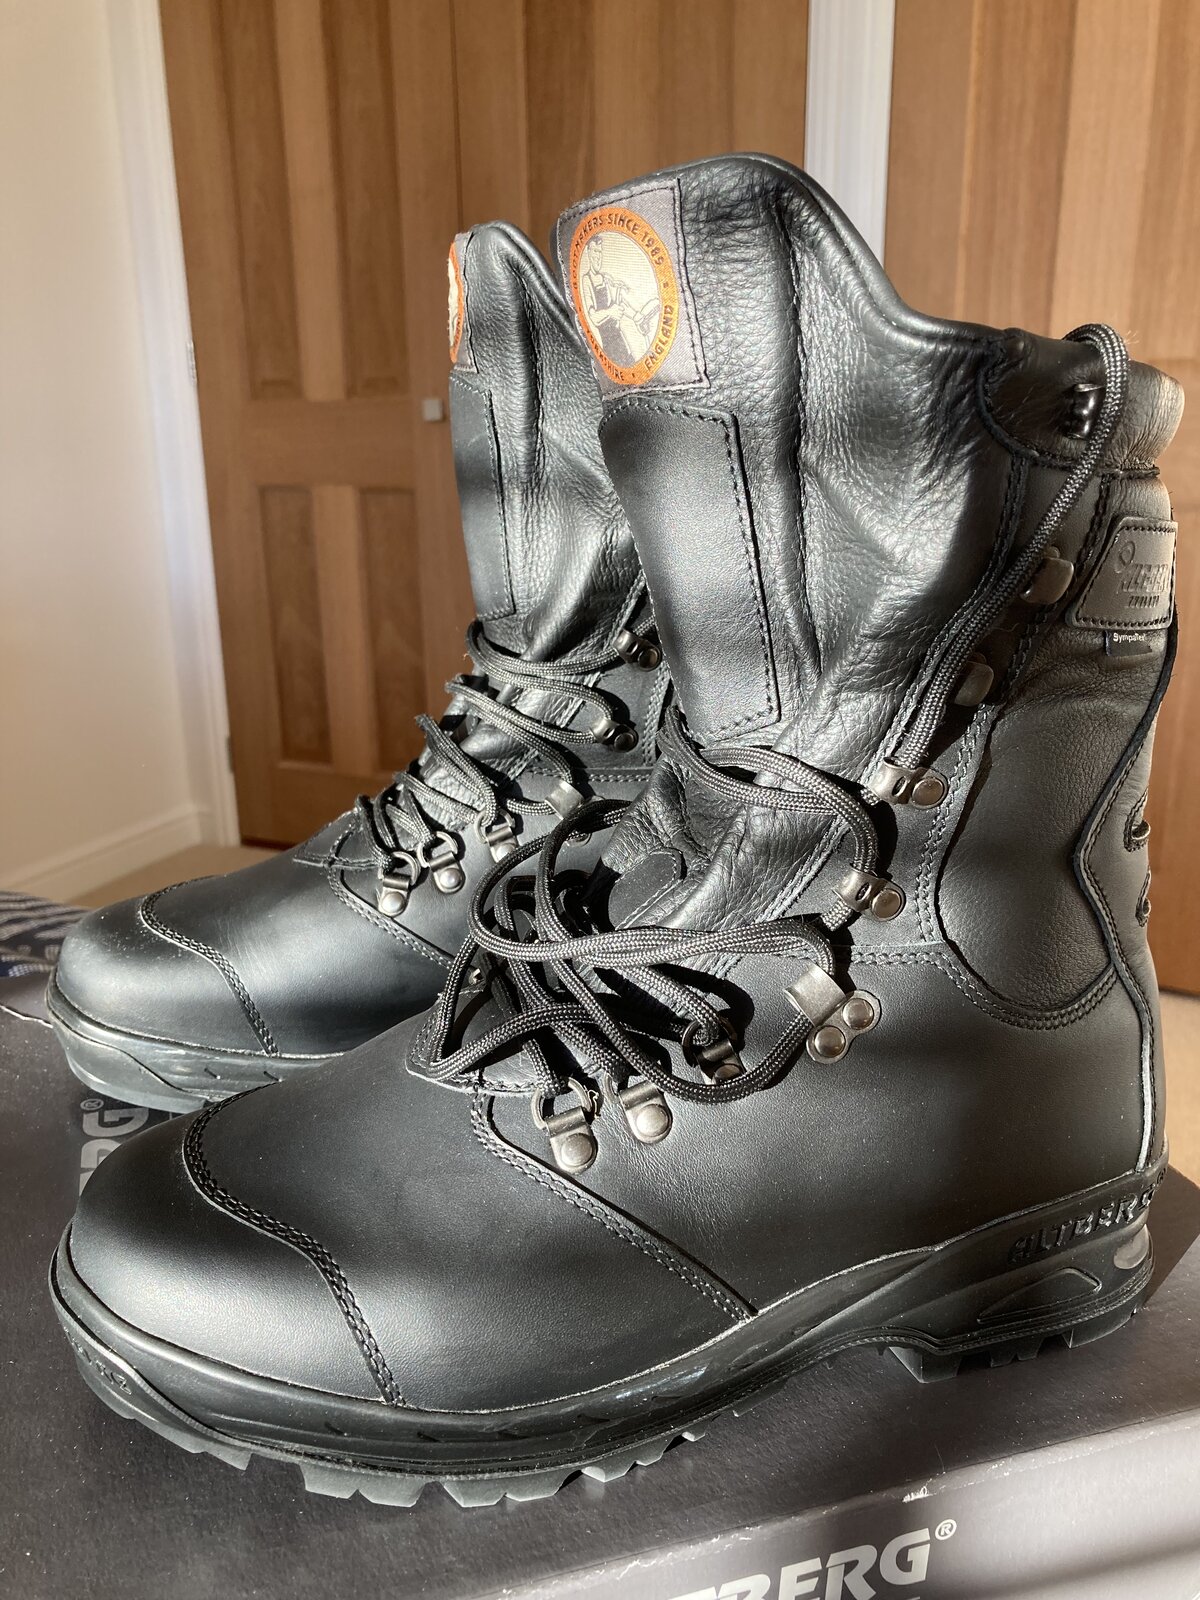 Alt-Berg Hogg motorcycle boots from Silverman's